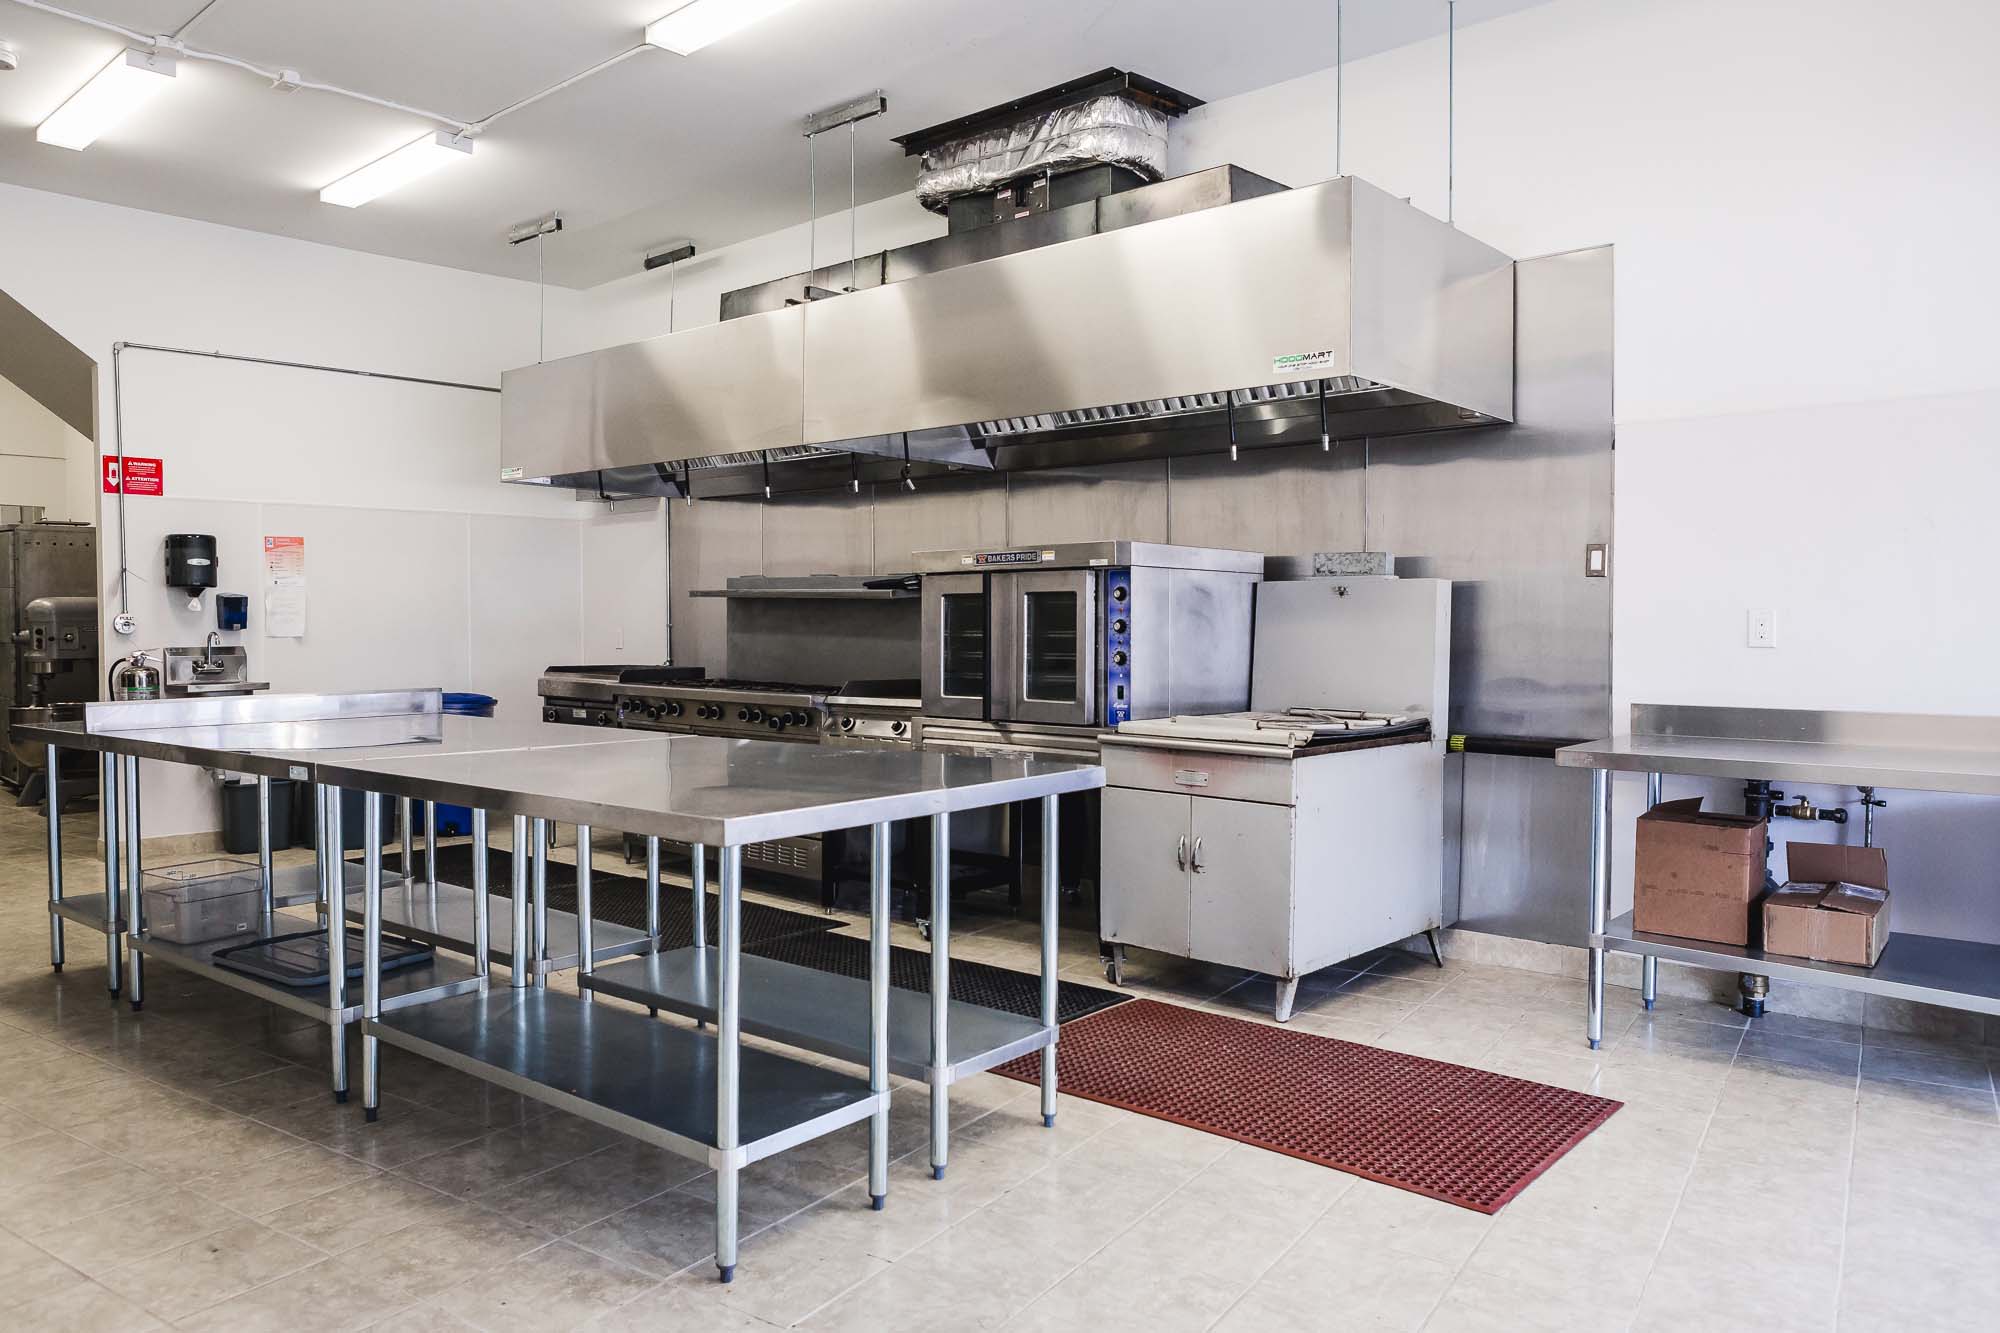 Commercial Kitchens For Rent Near Me - Small House ...